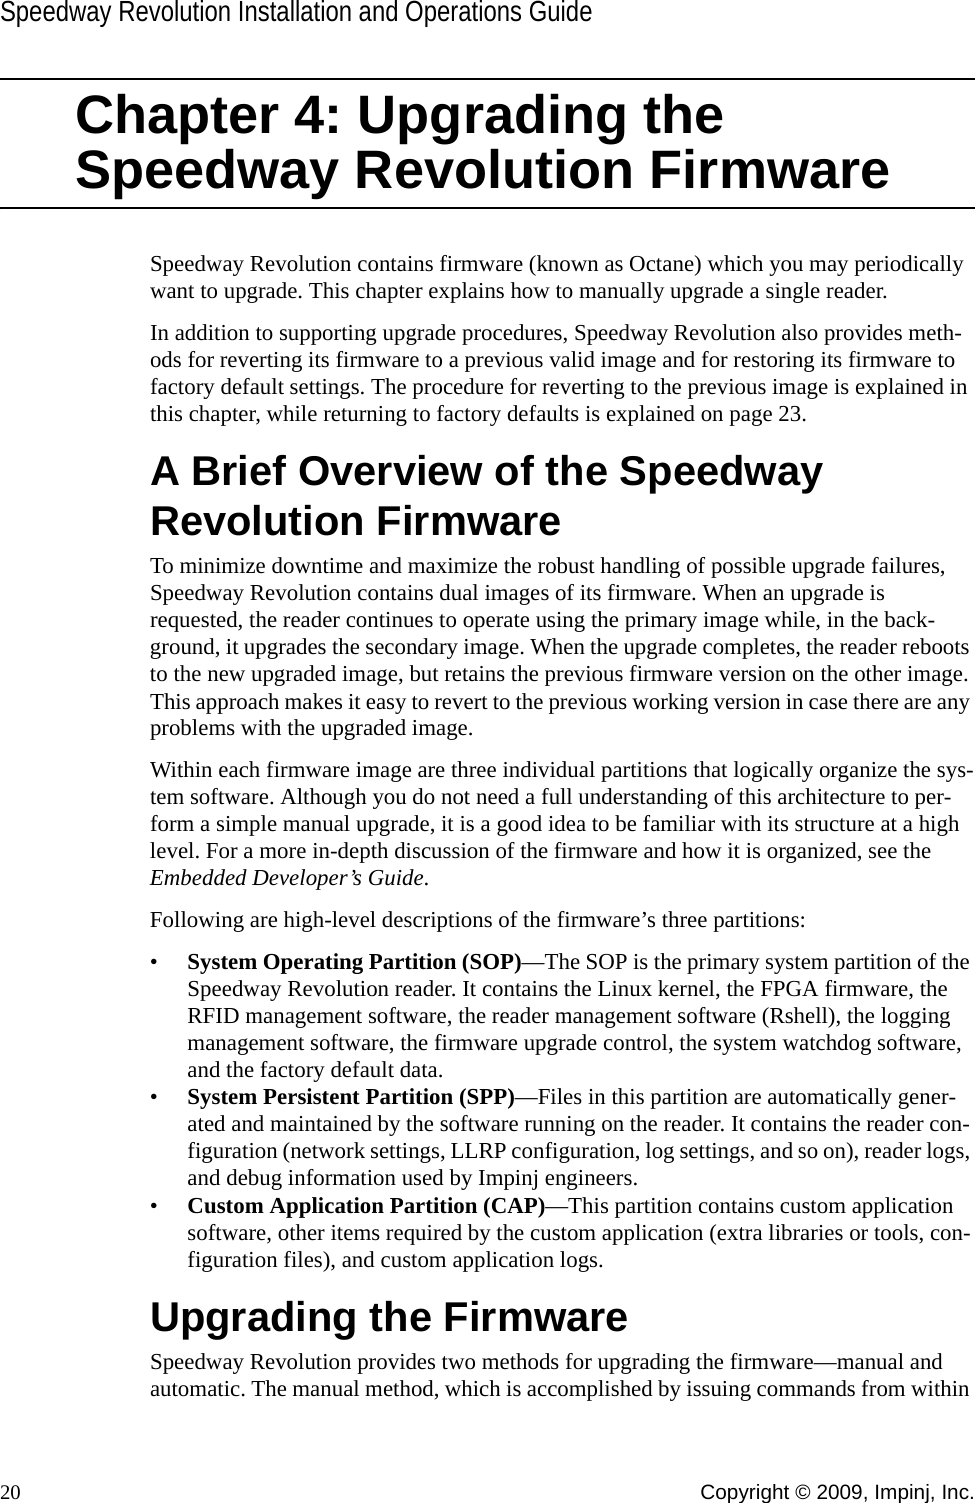 Speedway Revolution Installation and Operations Guide20 Copyright © 2009, Impinj, Inc.Chapter 4: Upgrading the Speedway Revolution FirmwareSpeedway Revolution contains firmware (known as Octane) which you may periodically want to upgrade. This chapter explains how to manually upgrade a single reader.In addition to supporting upgrade procedures, Speedway Revolution also provides meth-ods for reverting its firmware to a previous valid image and for restoring its firmware to factory default settings. The procedure for reverting to the previous image is explained in this chapter, while returning to factory defaults is explained on page 23.A Brief Overview of the Speedway Revolution FirmwareTo minimize downtime and maximize the robust handling of possible upgrade failures, Speedway Revolution contains dual images of its firmware. When an upgrade is requested, the reader continues to operate using the primary image while, in the back-ground, it upgrades the secondary image. When the upgrade completes, the reader reboots to the new upgraded image, but retains the previous firmware version on the other image. This approach makes it easy to revert to the previous working version in case there are any problems with the upgraded image.Within each firmware image are three individual partitions that logically organize the sys-tem software. Although you do not need a full understanding of this architecture to per-form a simple manual upgrade, it is a good idea to be familiar with its structure at a high level. For a more in-depth discussion of the firmware and how it is organized, see the Embedded Developer’s Guide.Following are high-level descriptions of the firmware’s three partitions:•System Operating Partition (SOP)—The SOP is the primary system partition of the Speedway Revolution reader. It contains the Linux kernel, the FPGA firmware, the RFID management software, the reader management software (Rshell), the logging management software, the firmware upgrade control, the system watchdog software, and the factory default data.•System Persistent Partition (SPP)—Files in this partition are automatically gener-ated and maintained by the software running on the reader. It contains the reader con-figuration (network settings, LLRP configuration, log settings, and so on), reader logs, and debug information used by Impinj engineers.•Custom Application Partition (CAP)—This partition contains custom application software, other items required by the custom application (extra libraries or tools, con-figuration files), and custom application logs.Upgrading the FirmwareSpeedway Revolution provides two methods for upgrading the firmware—manual and automatic. The manual method, which is accomplished by issuing commands from within 